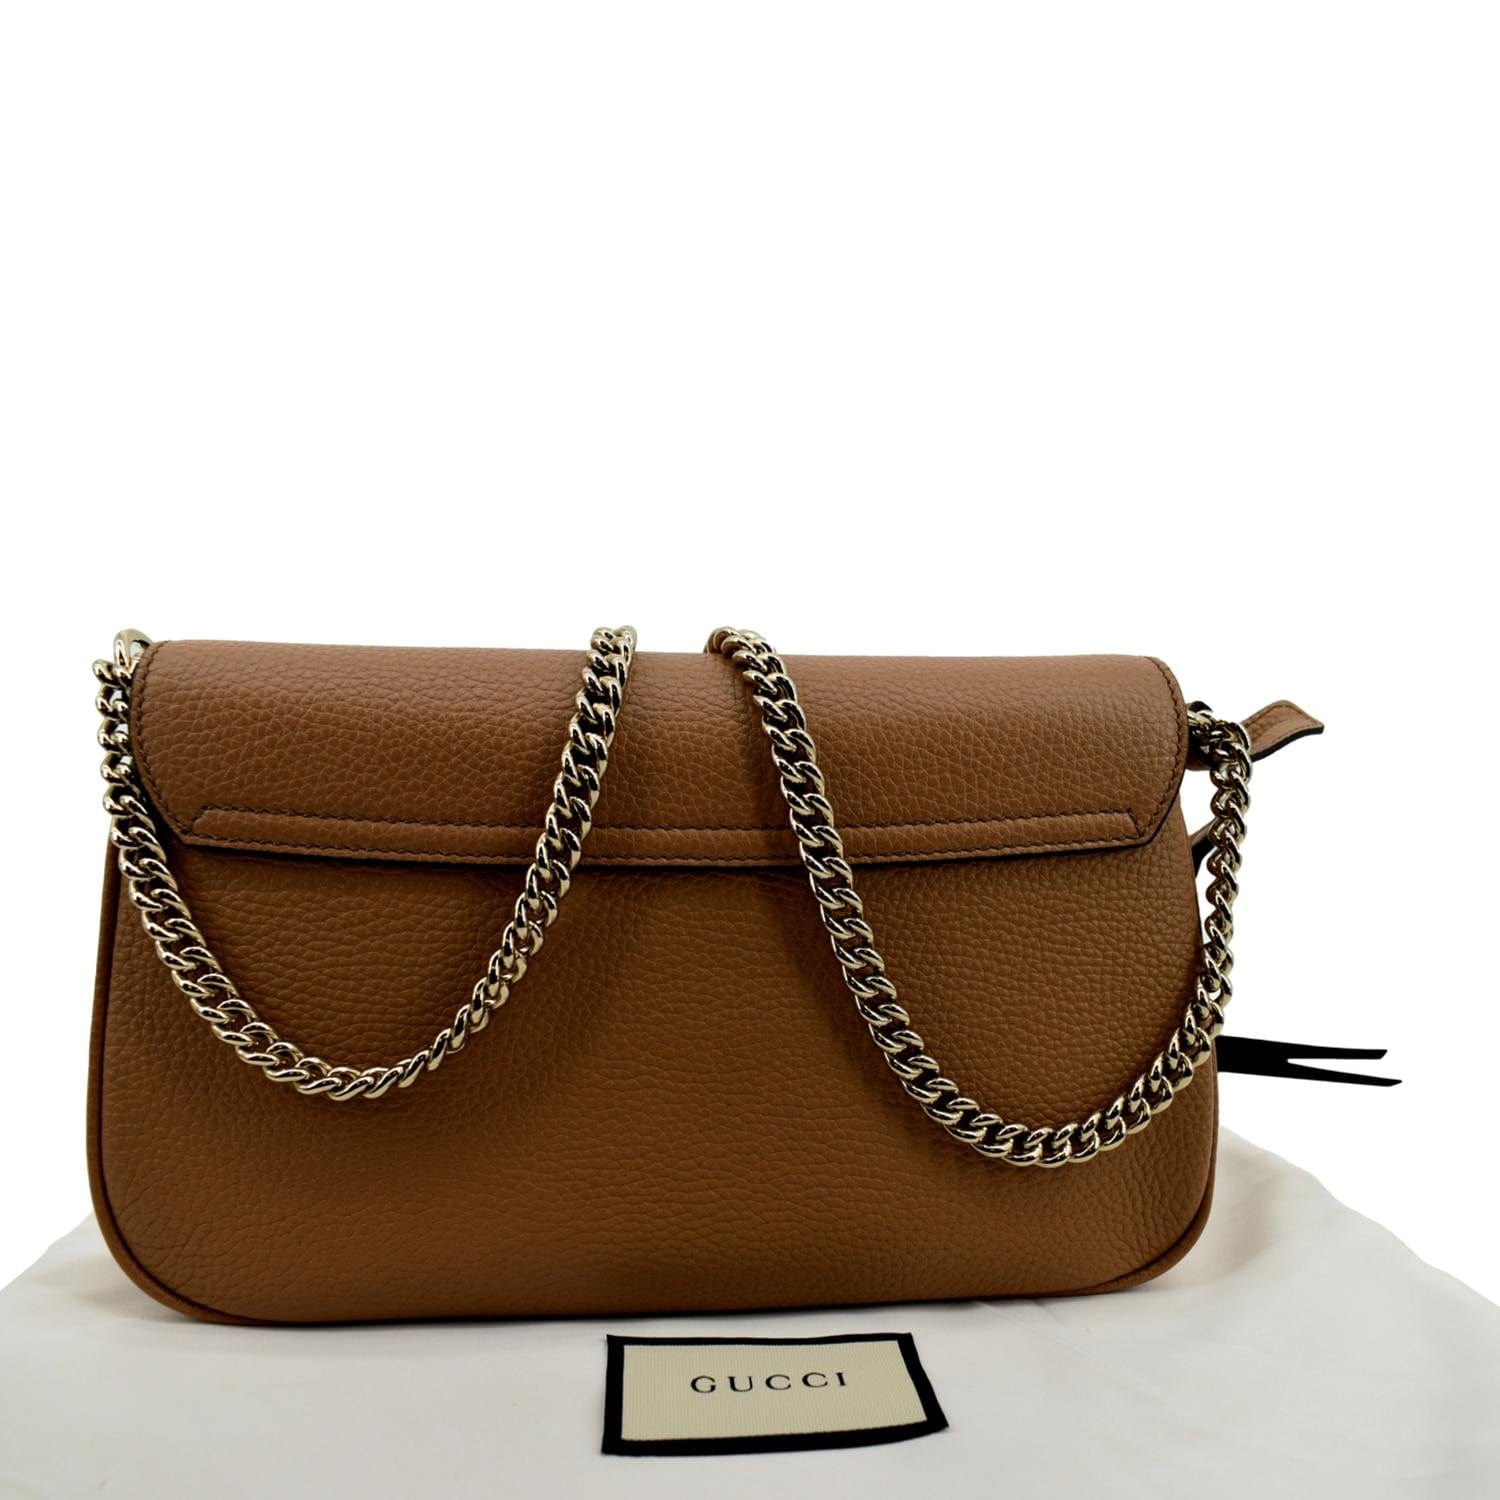 Gucci Soho Chain Flap Leather Crossbody Bag in Brown